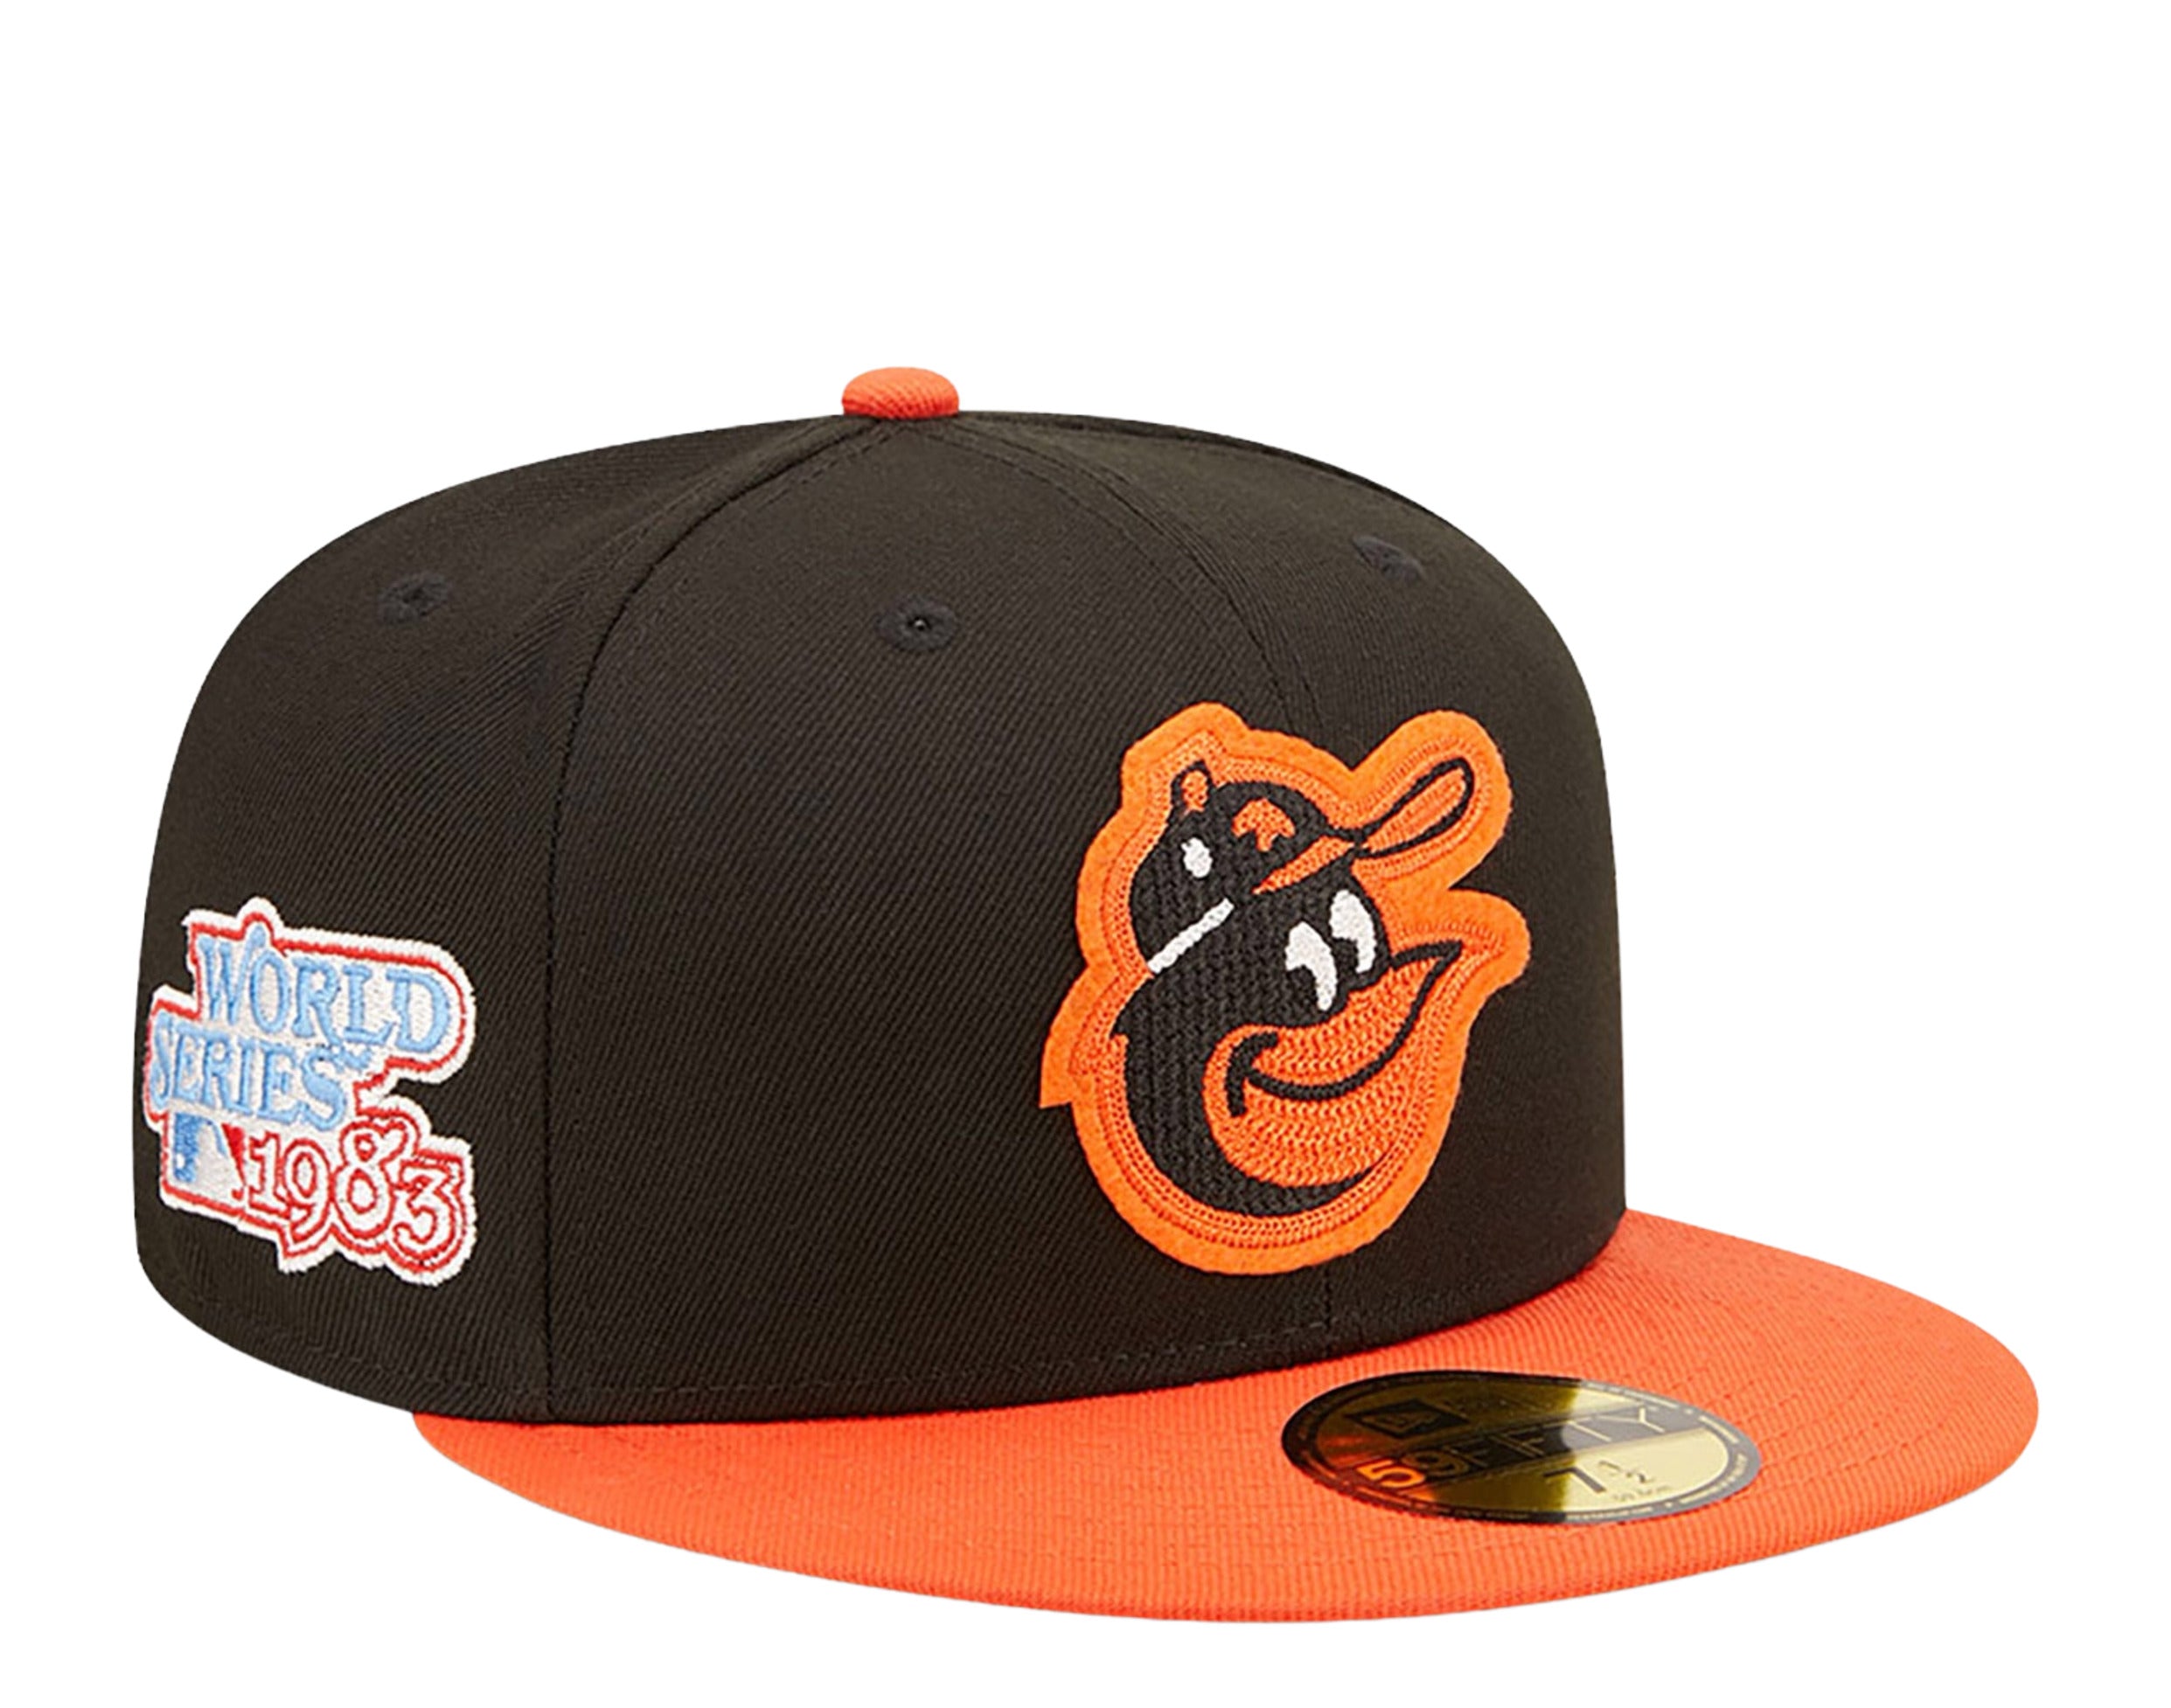 New Era 59FIFTY Baltimore Orioles World Class Fitted Hat in Beige | Size 7 3/4 | 60355952